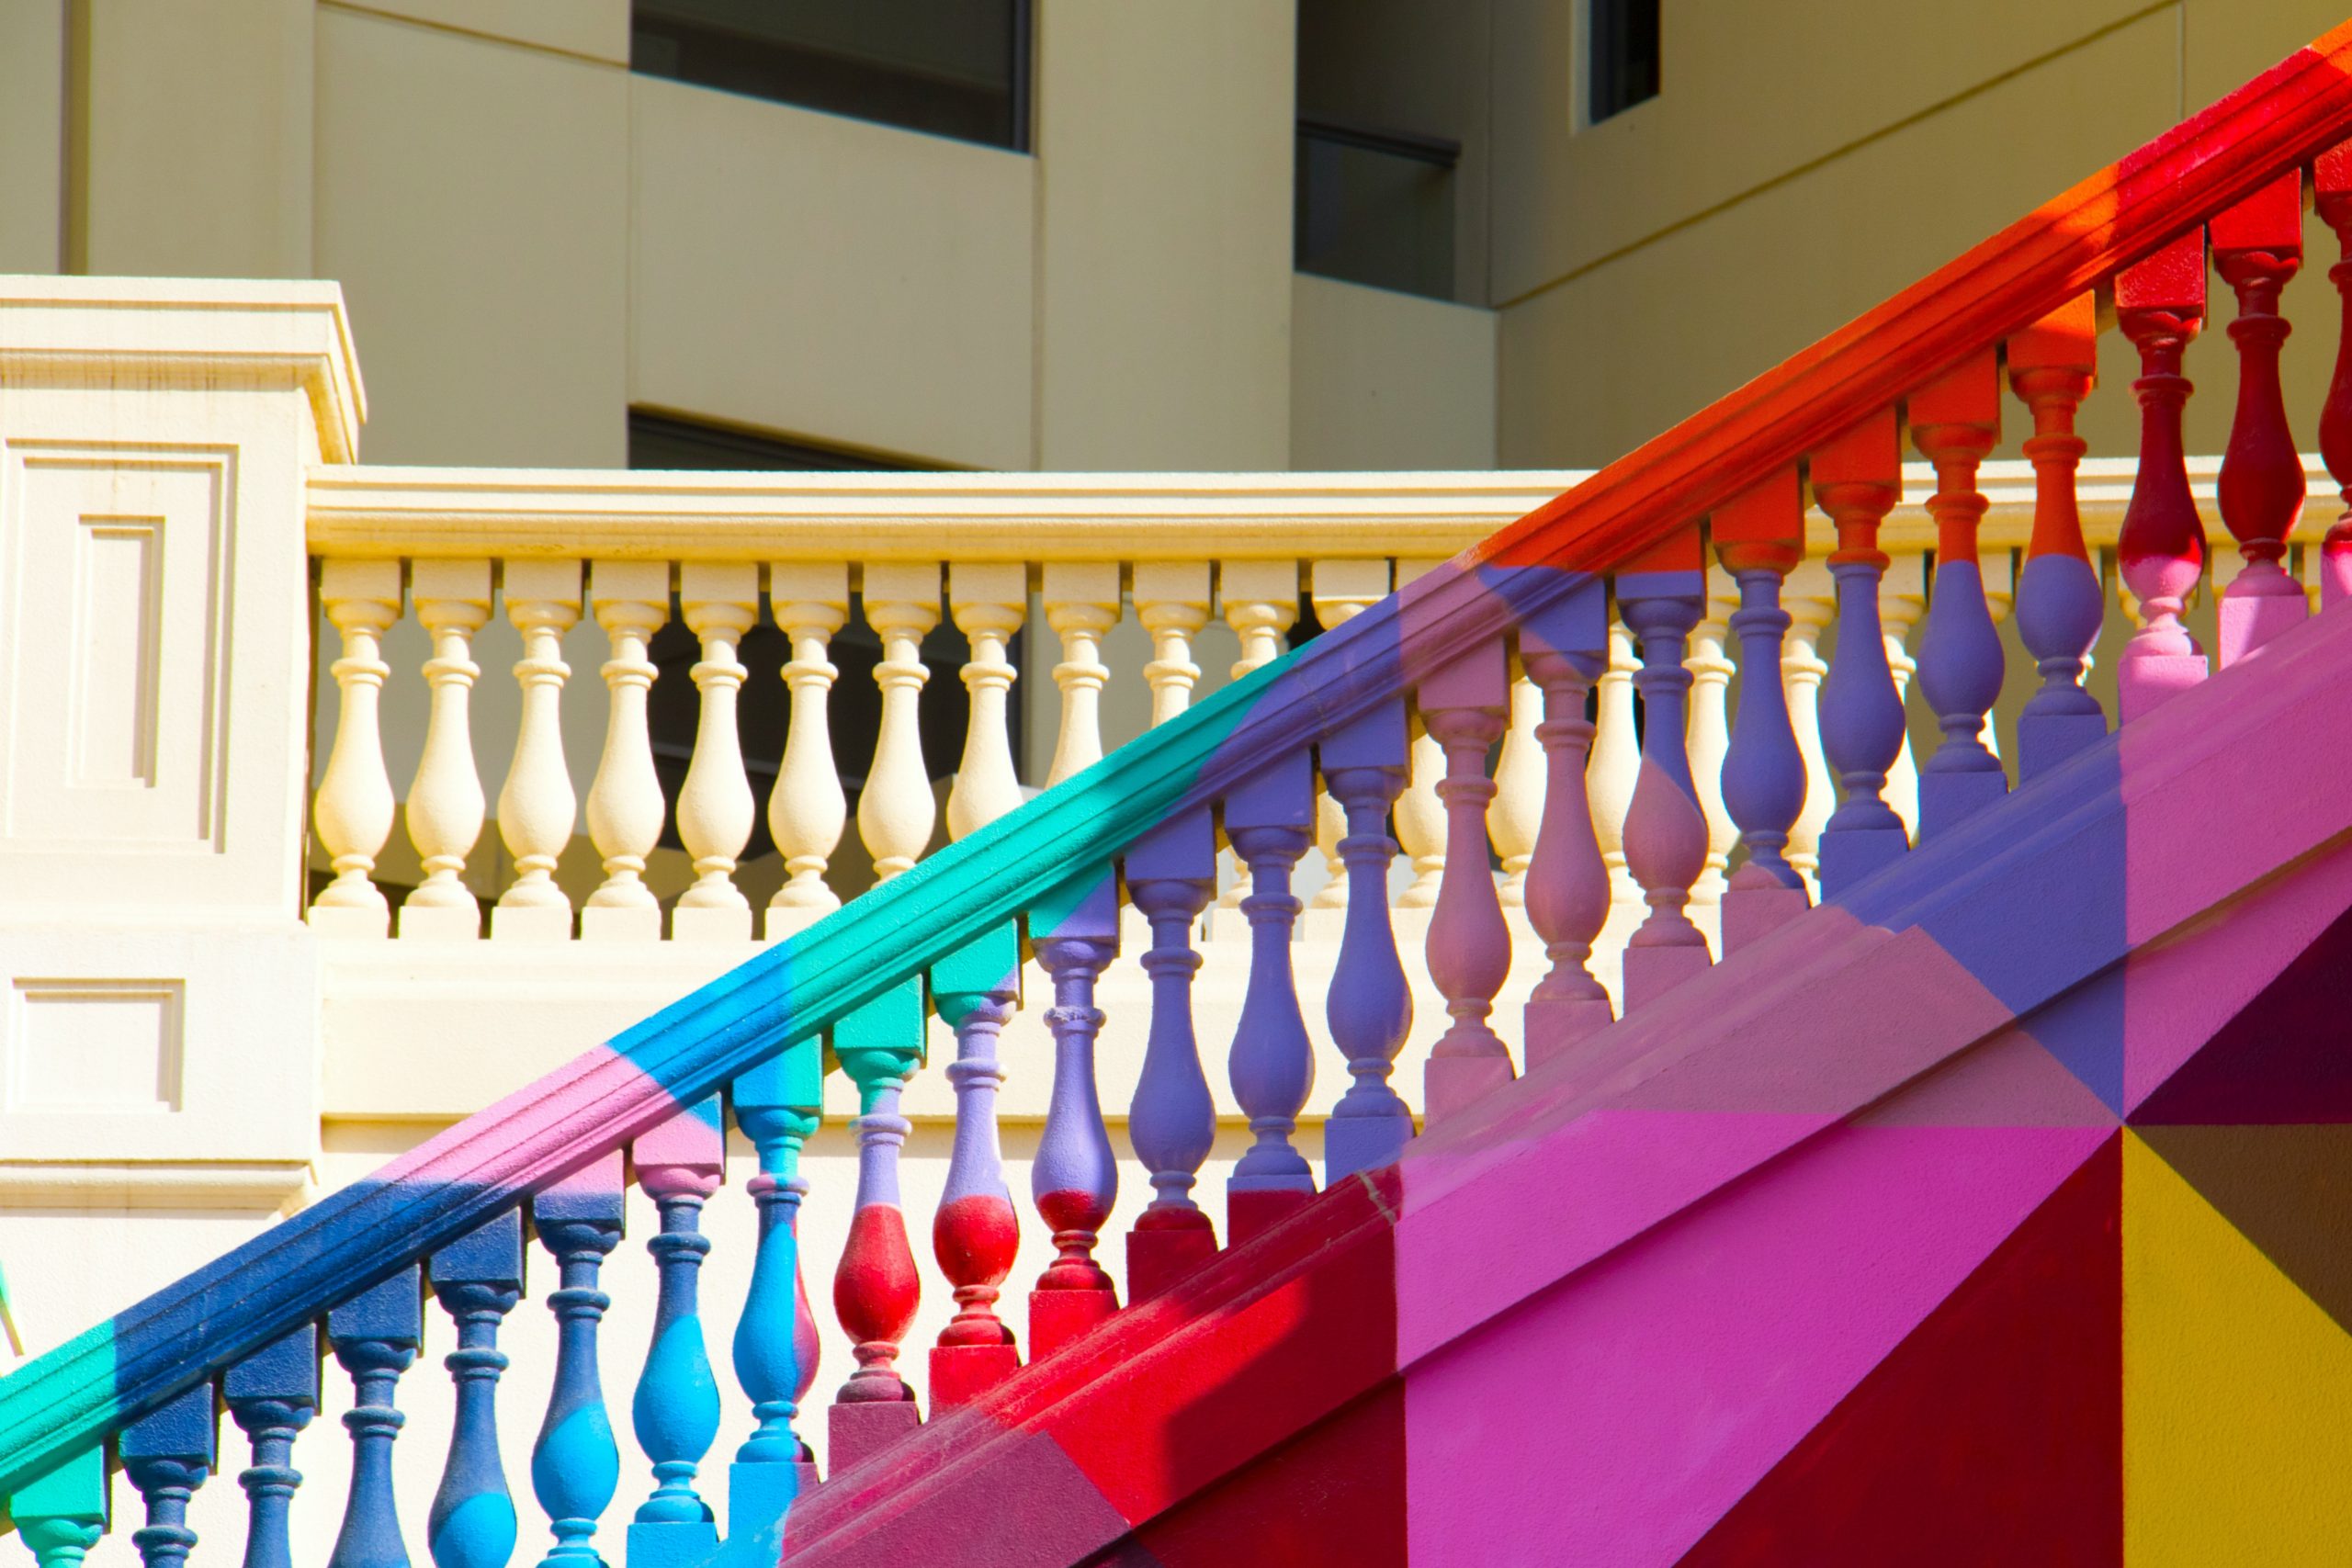 A colourfully painted staircase inside a building.